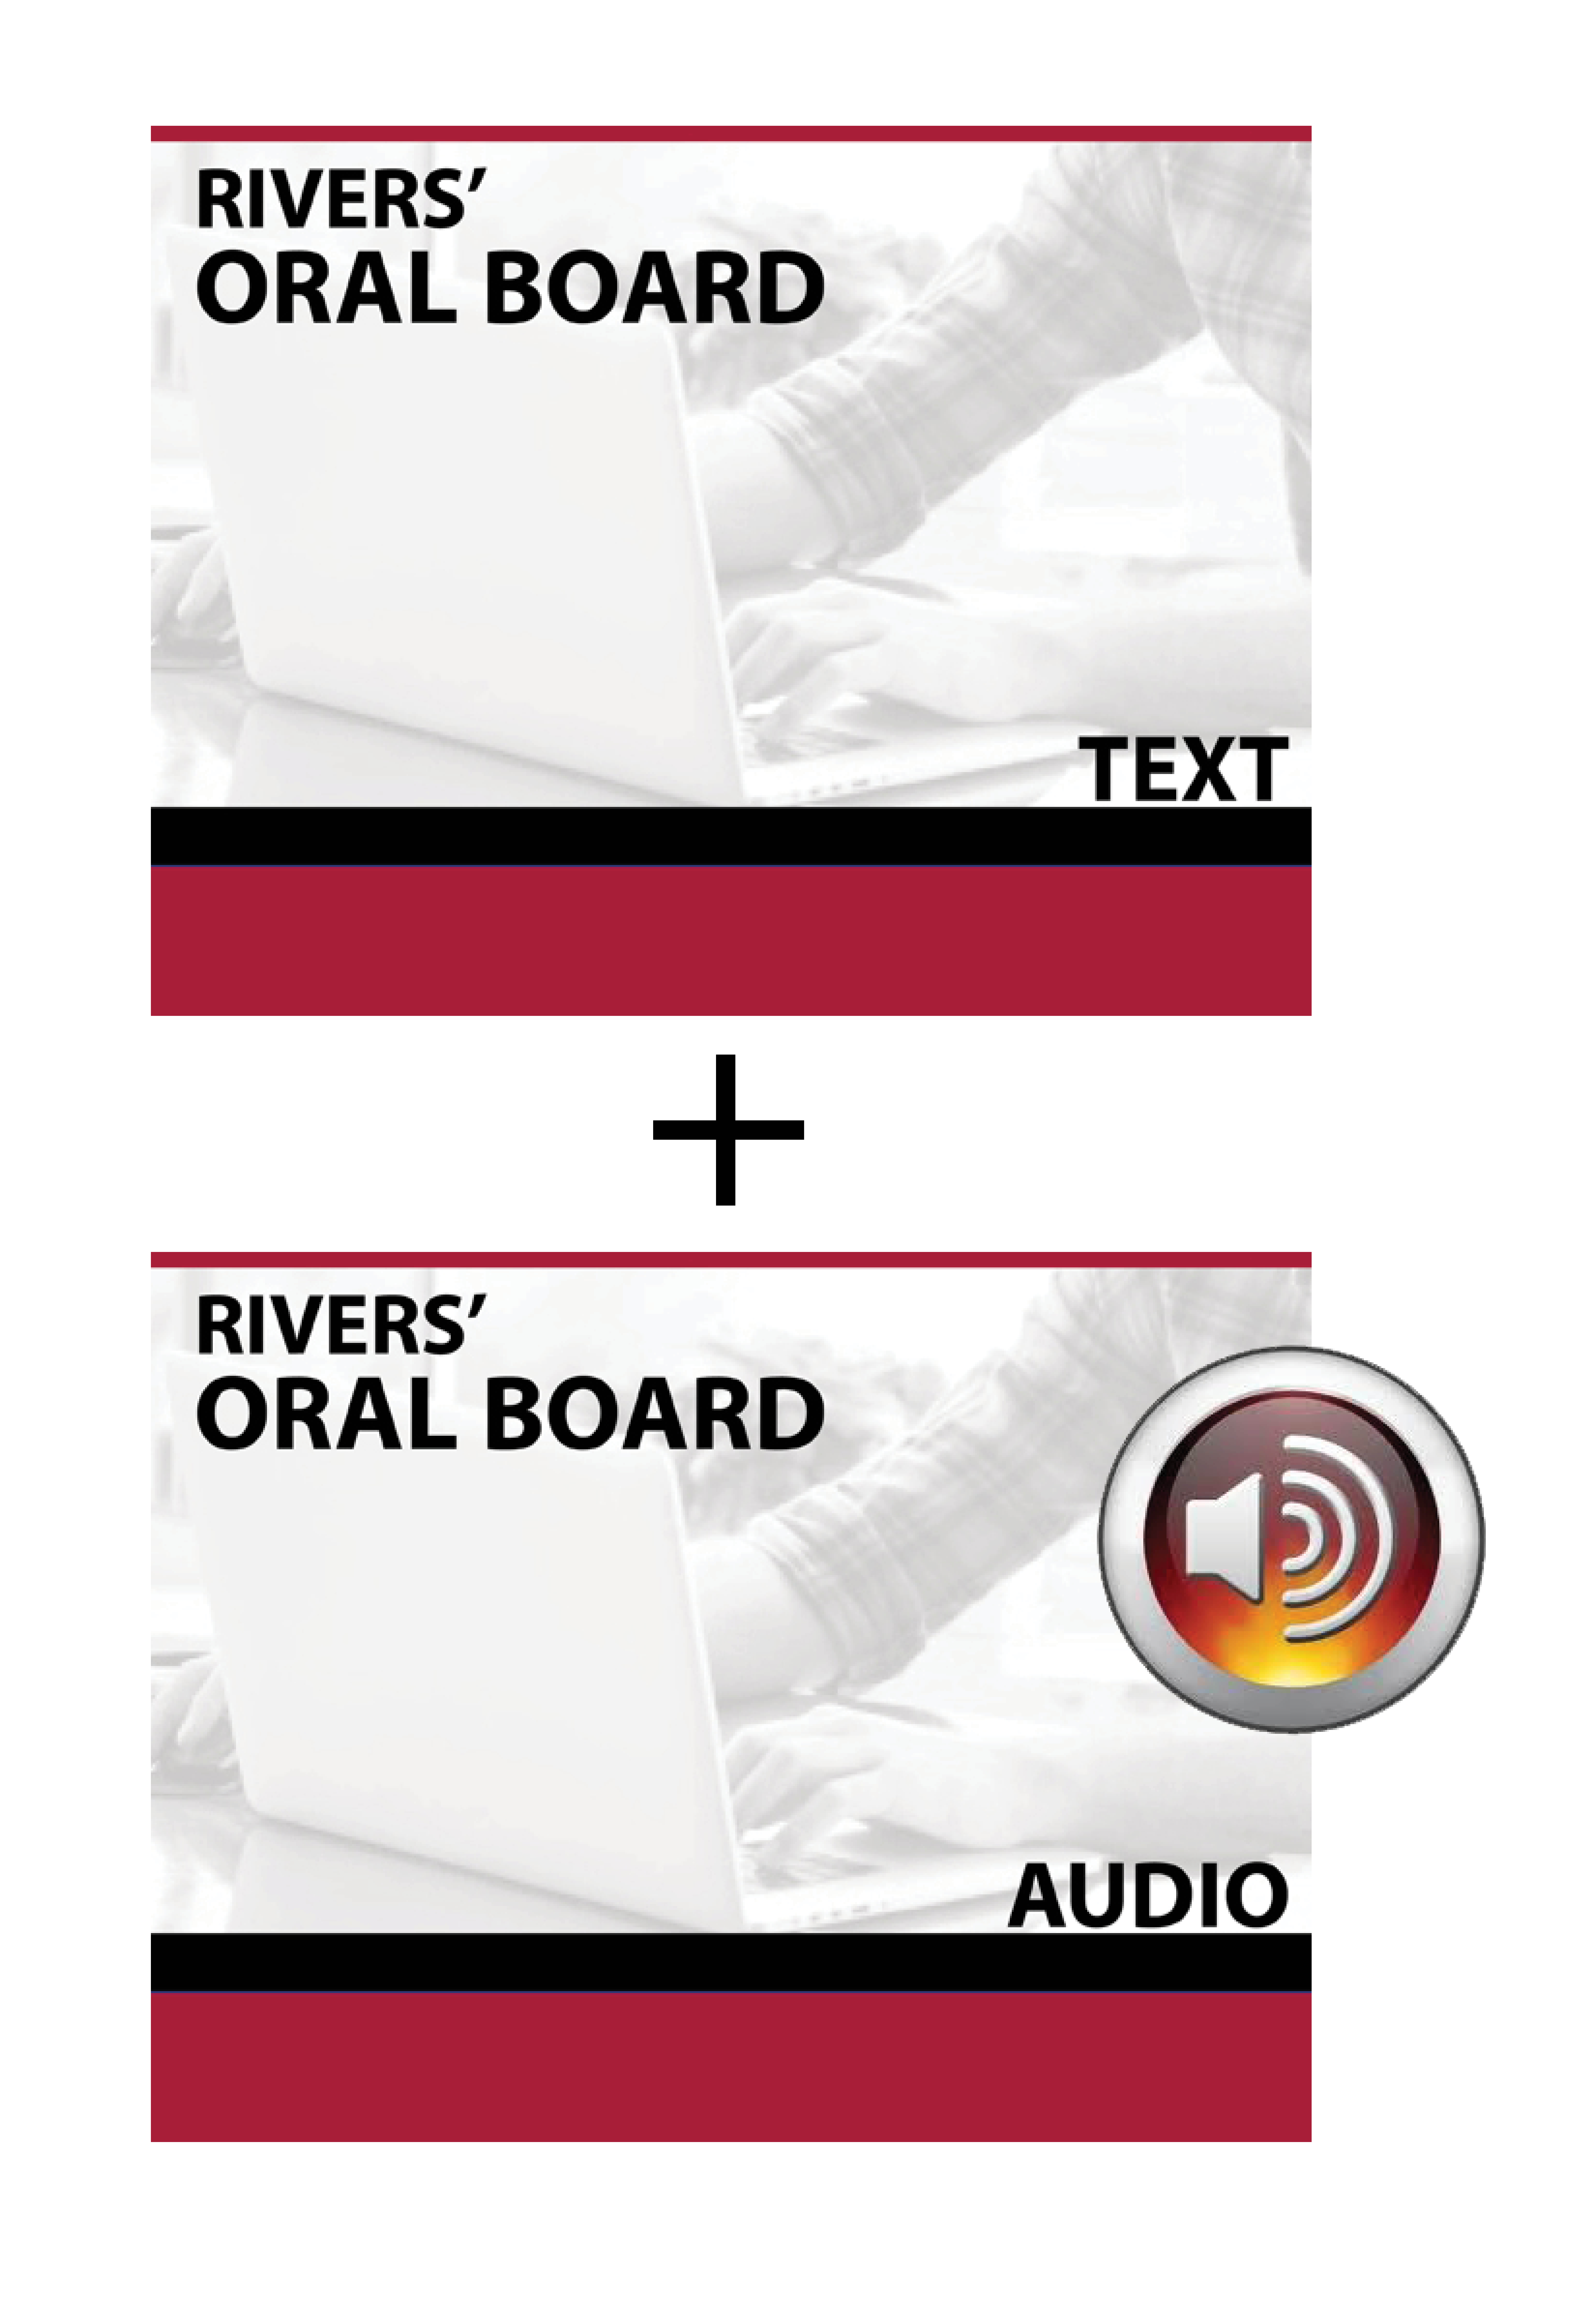 Oral Board Stacked Text and Audio Image_for EMRA.jpg